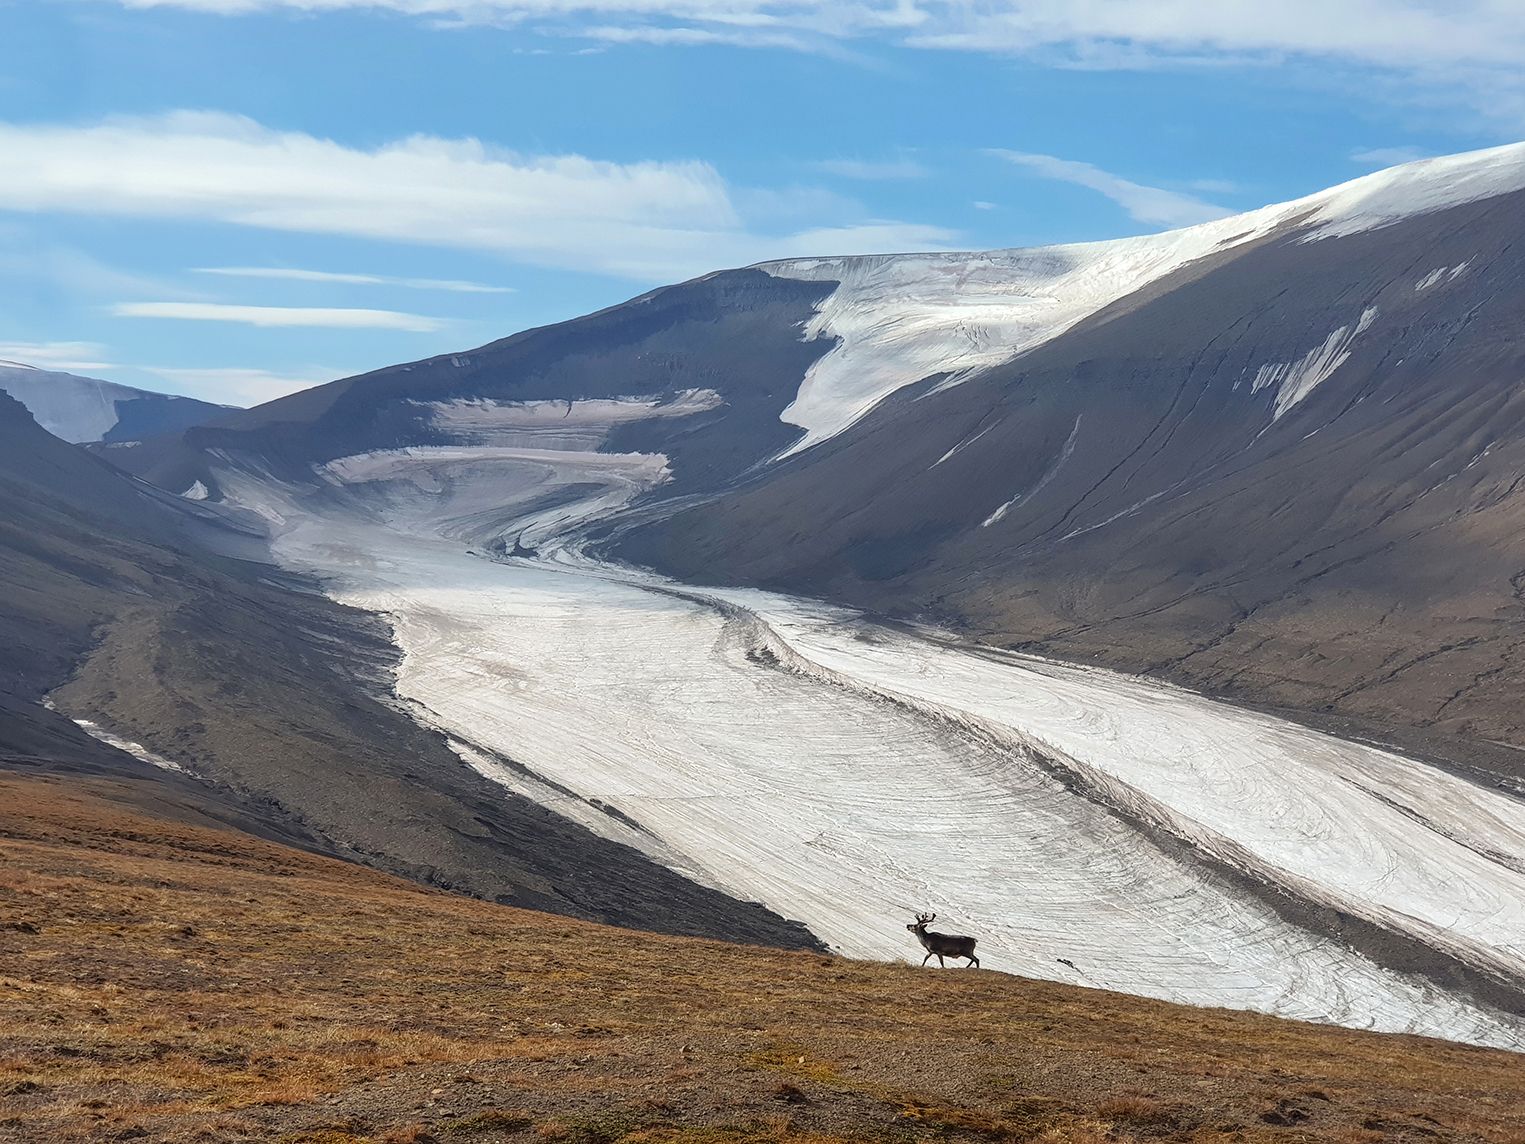 A reindeer spotted on Sarkofagen Mountain, on the island of Svalbard.